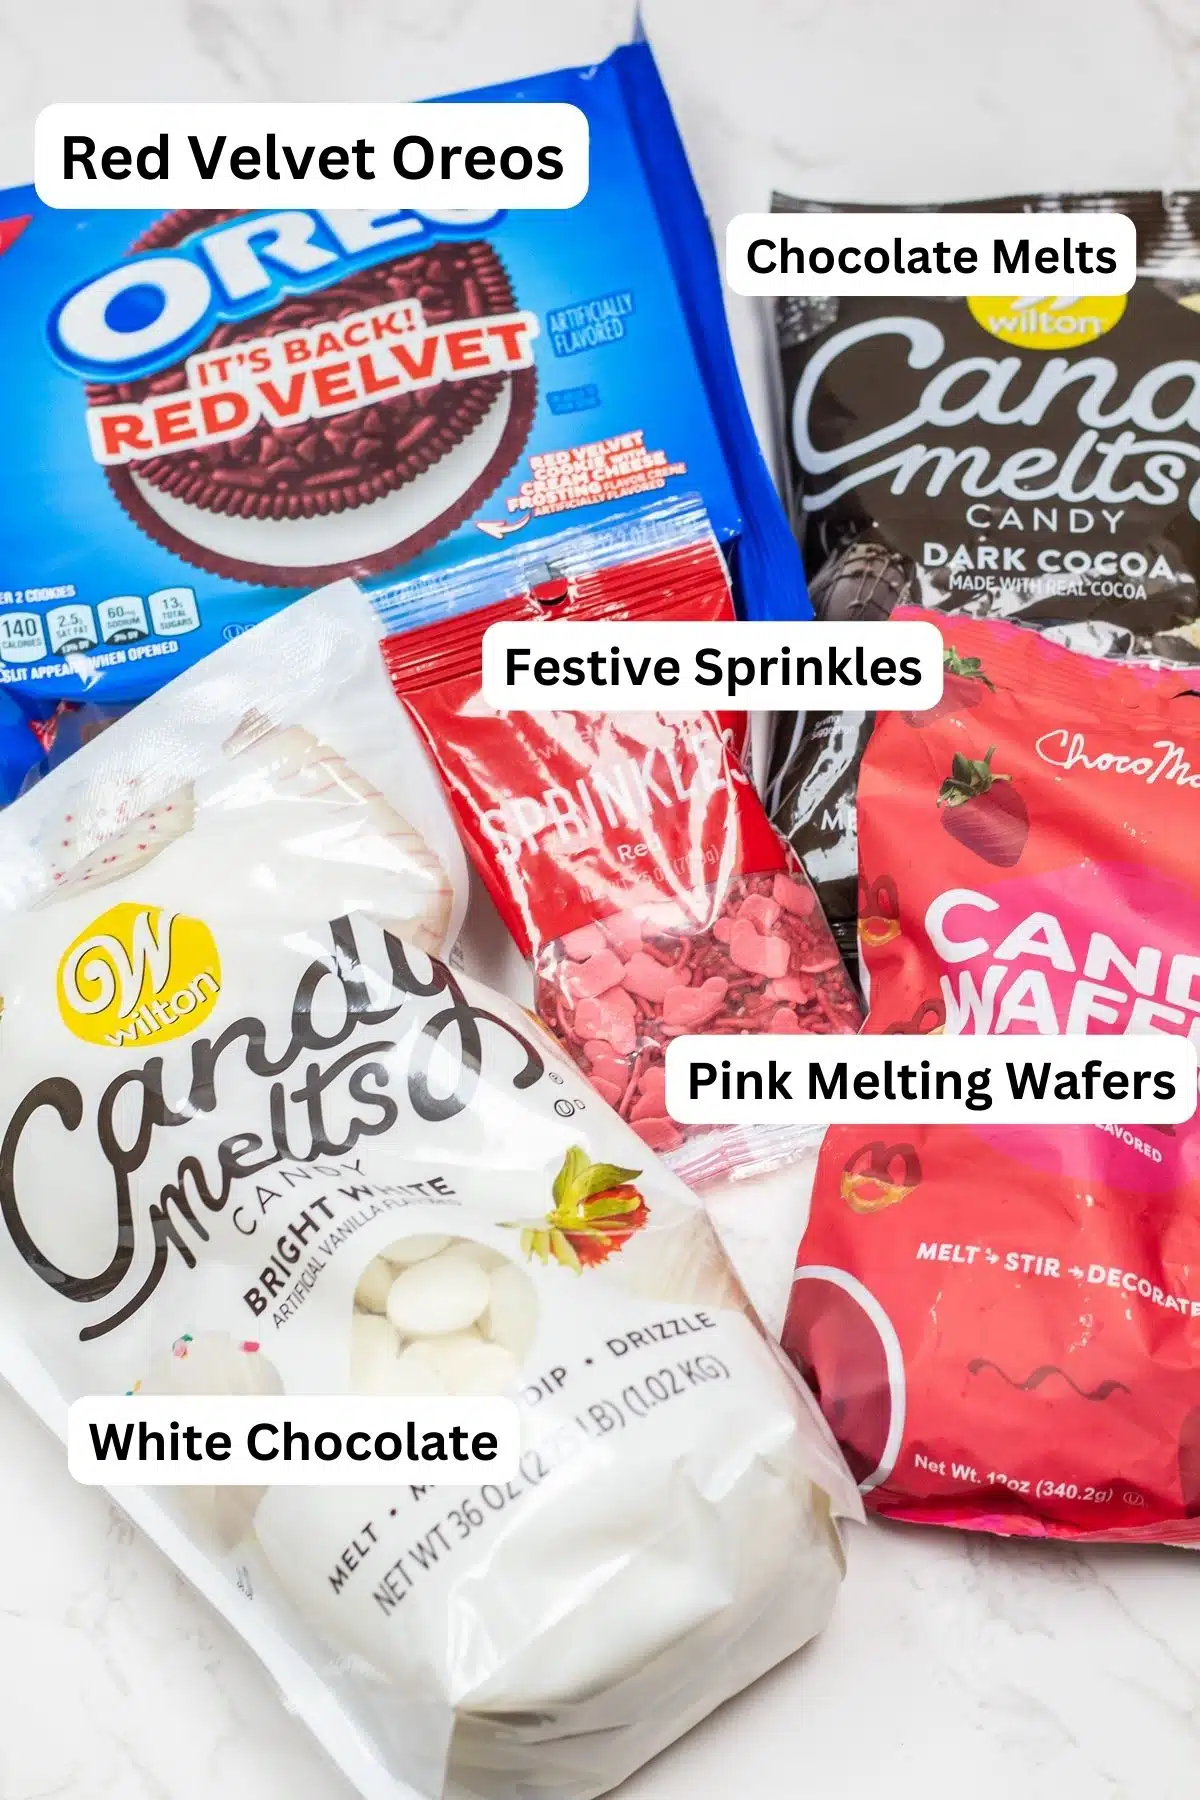 Valentine's Day Oreo chocolate bark candy making ingredients with labels.